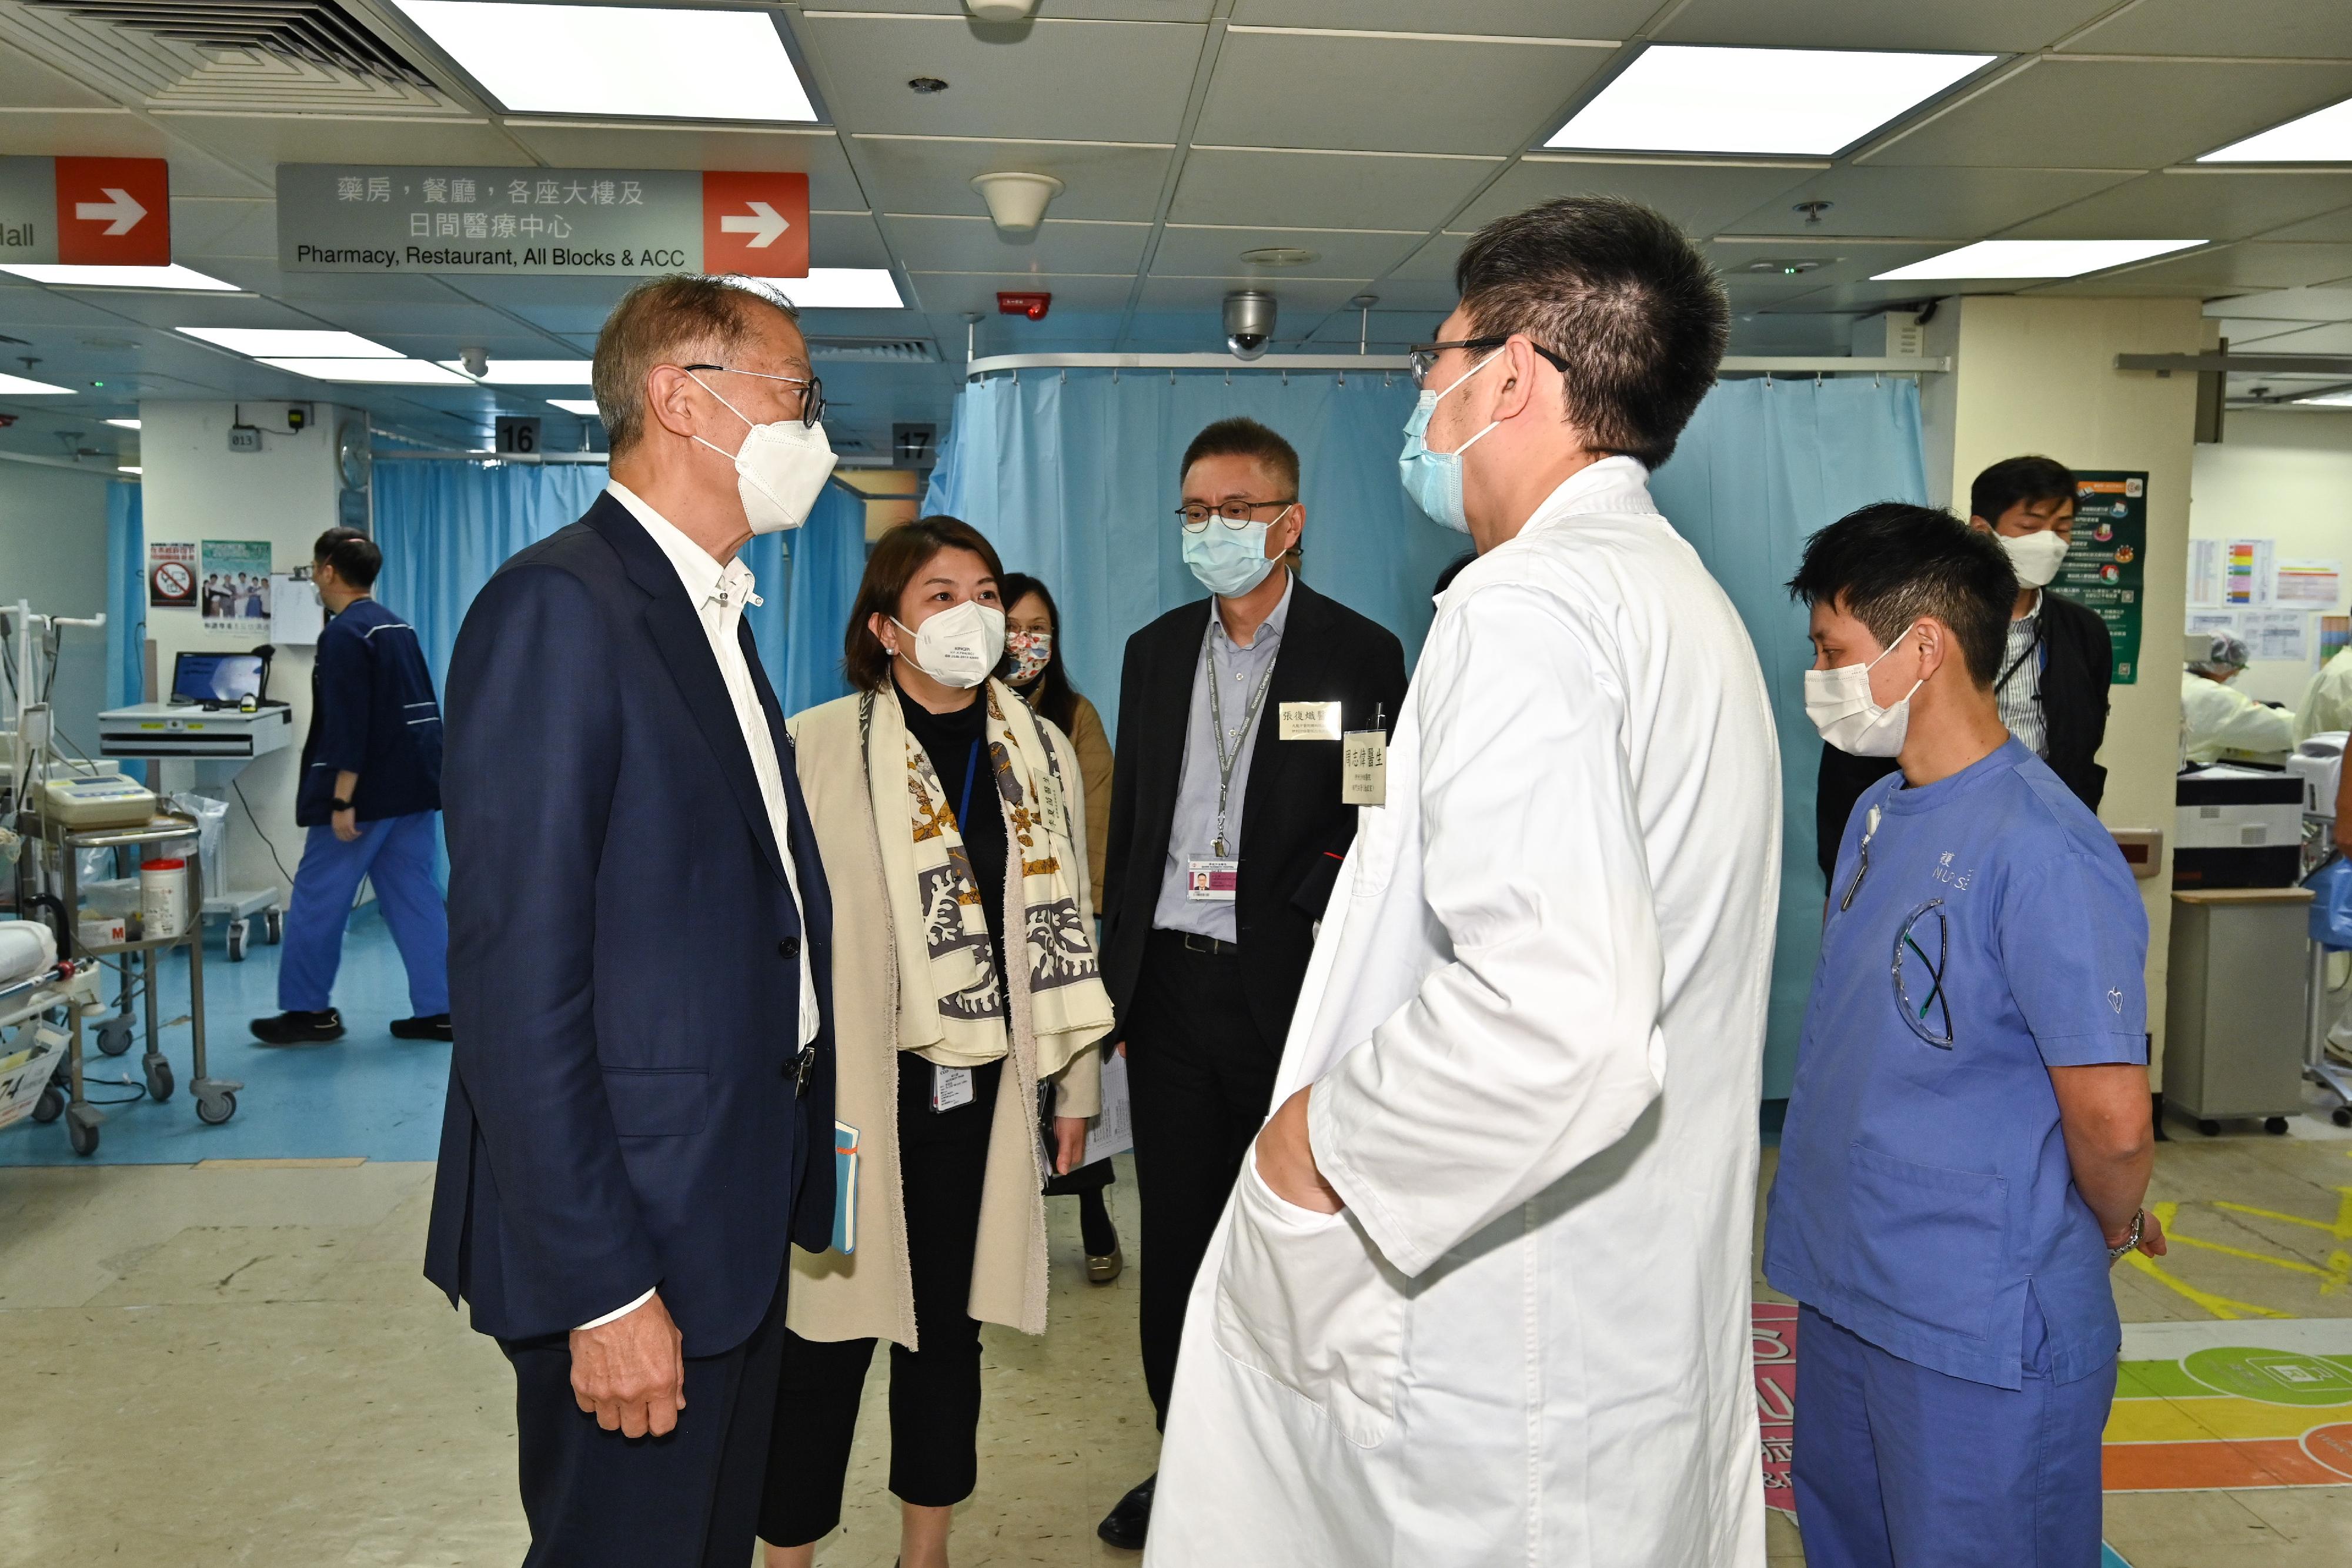 The Secretary for Health, Professor Lo Chung-mau (first left), and the Under Secretary for Health, Dr Libby Lee (second left), visited Queen Elizabeth Hospital today (January 3) to inspect the Accident and Emergency Department and get a grasp on the operation of public hospitals during the service surge. Professor Lo expressed his gratitude to frontline healthcare staff for their efforts and contributions. Looking on is the Cluster Chief Executive of Kowloon Central Cluster of the Hospital Authority, Dr Eric Cheung (third left).